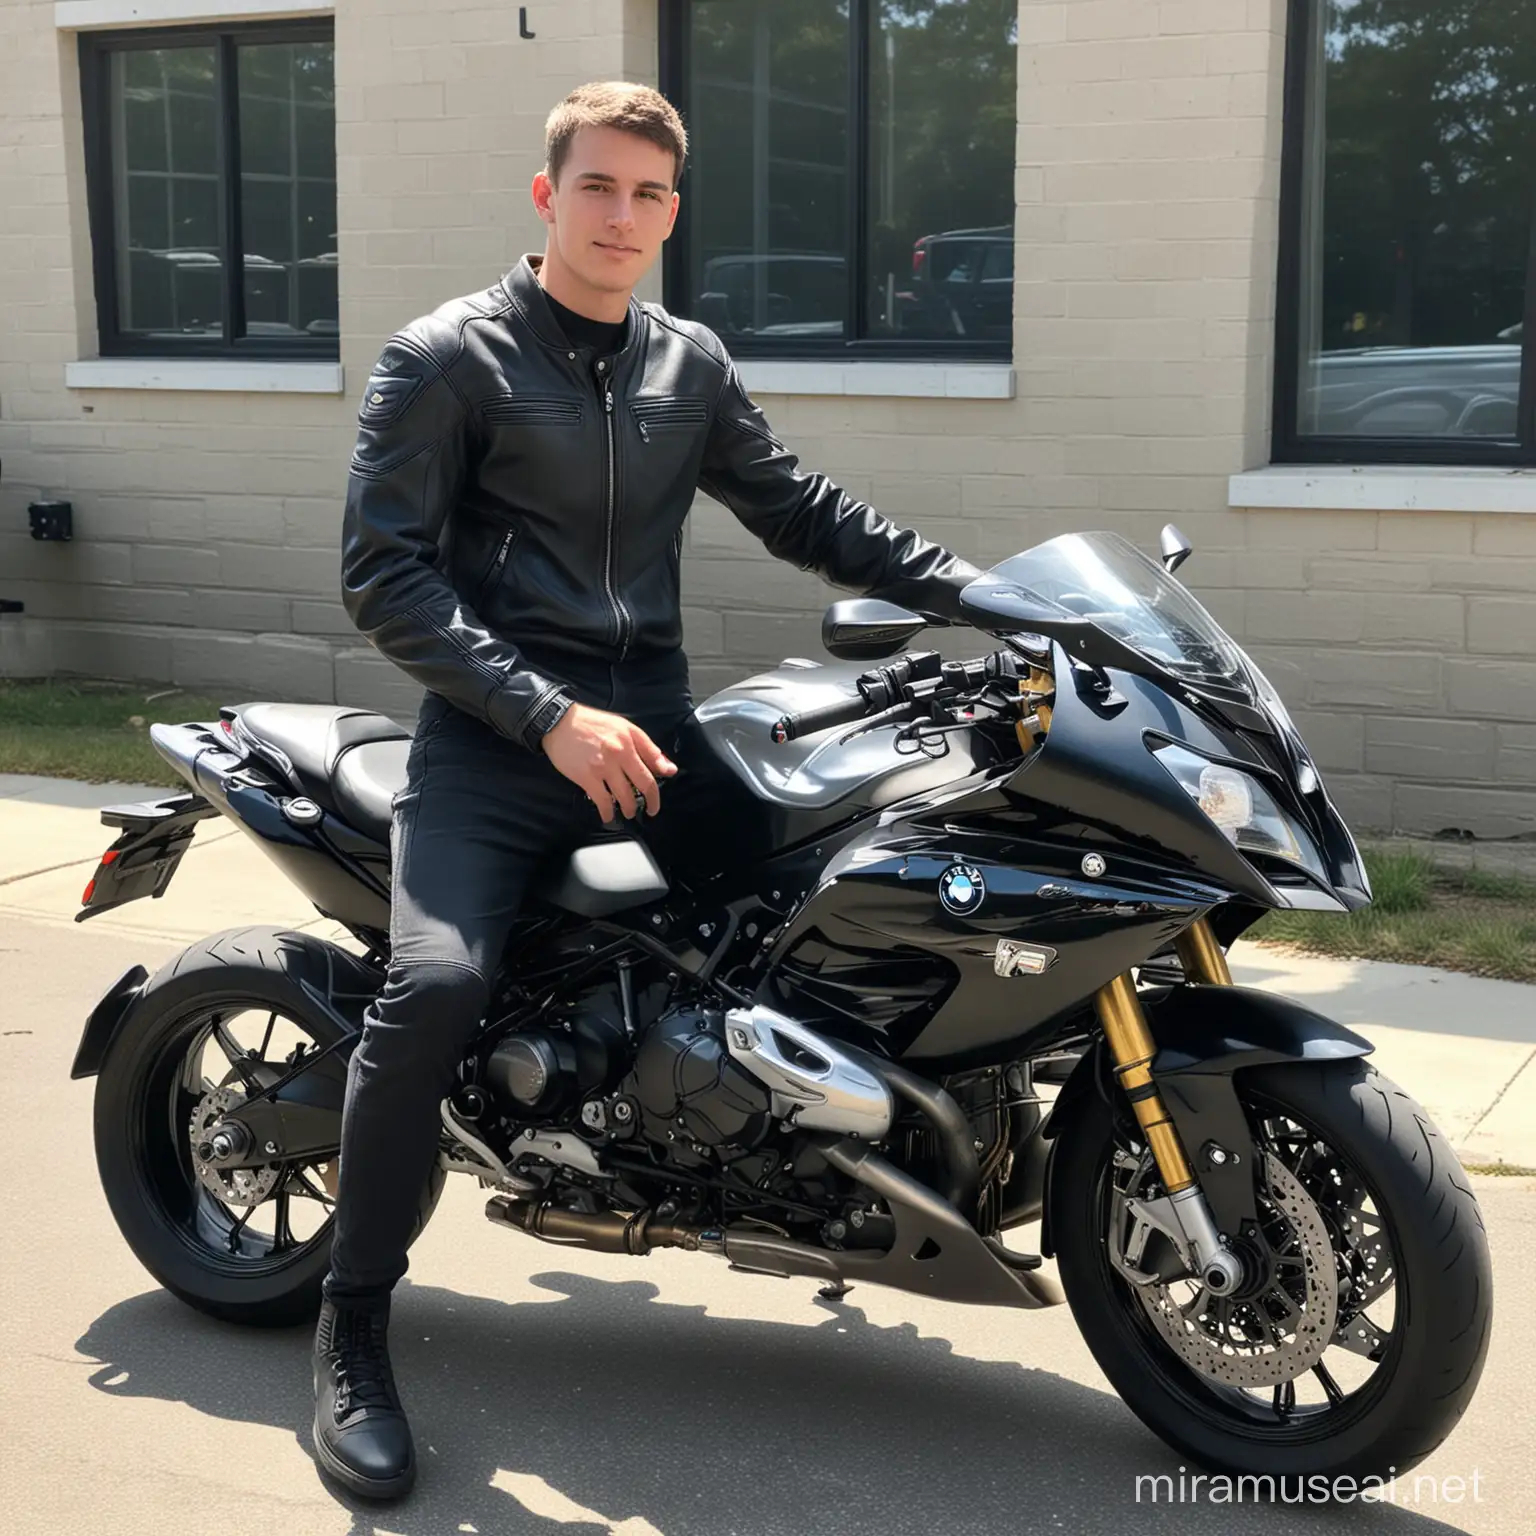 A photo of a young man with short hair sitting on his black BMW S1000 motorcycle, he is wearing all leather and has no helmet, the bike parked at school in Maine during summer break, posted to Snapchat in the style of 2098.